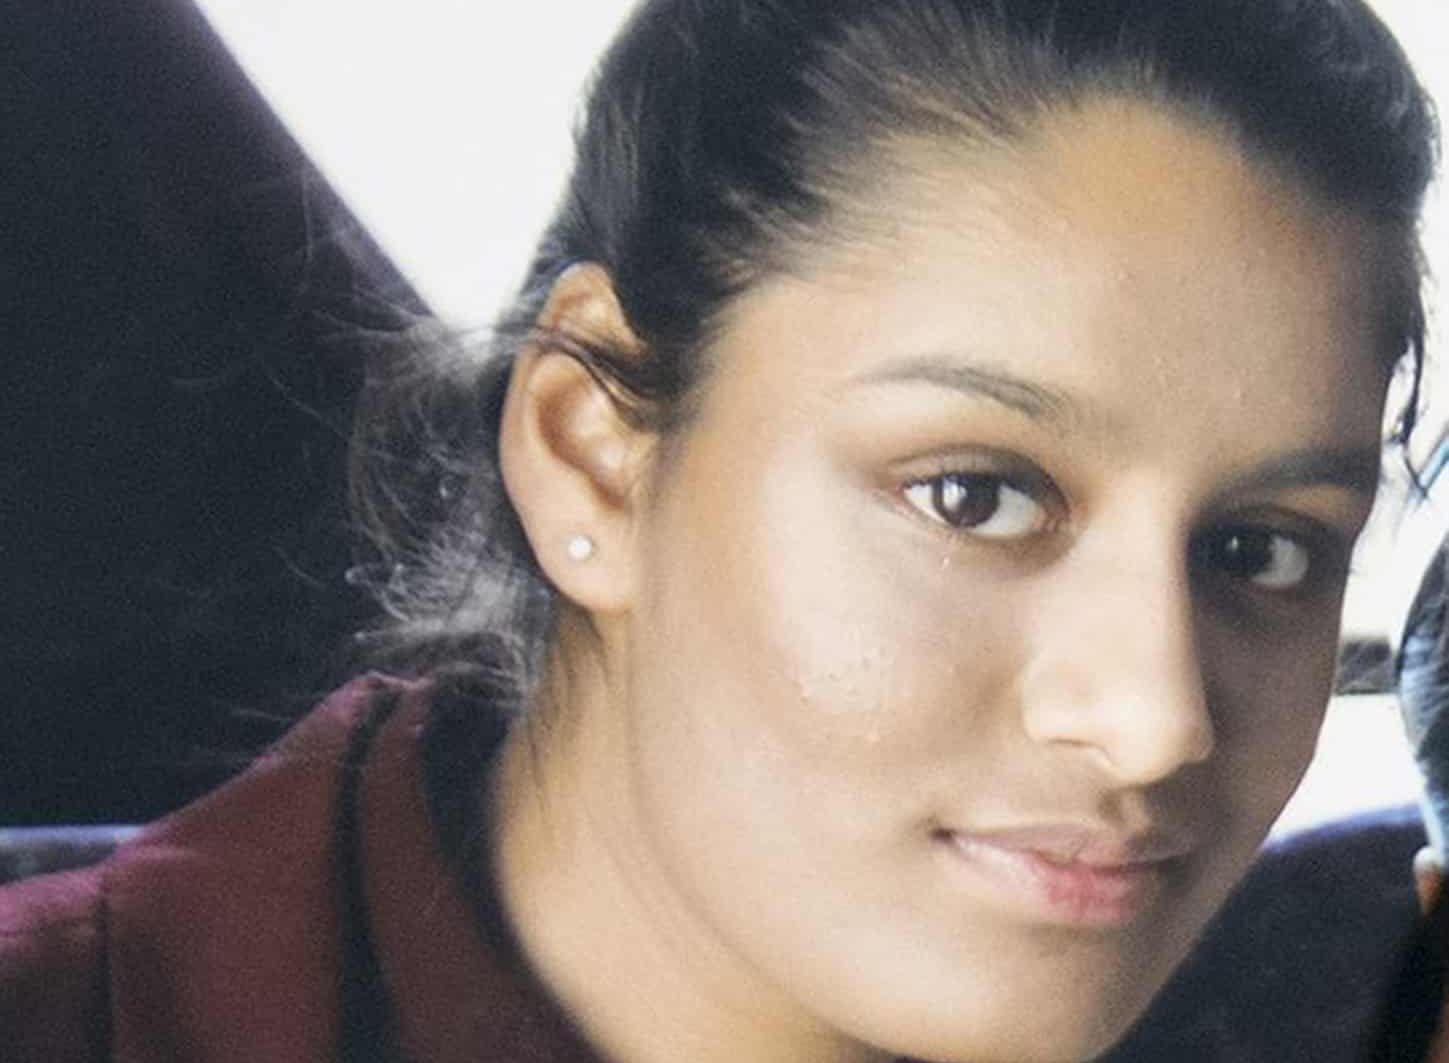 Shamima Begum is ‘no danger’ to UK and should return, ex-diplomat says